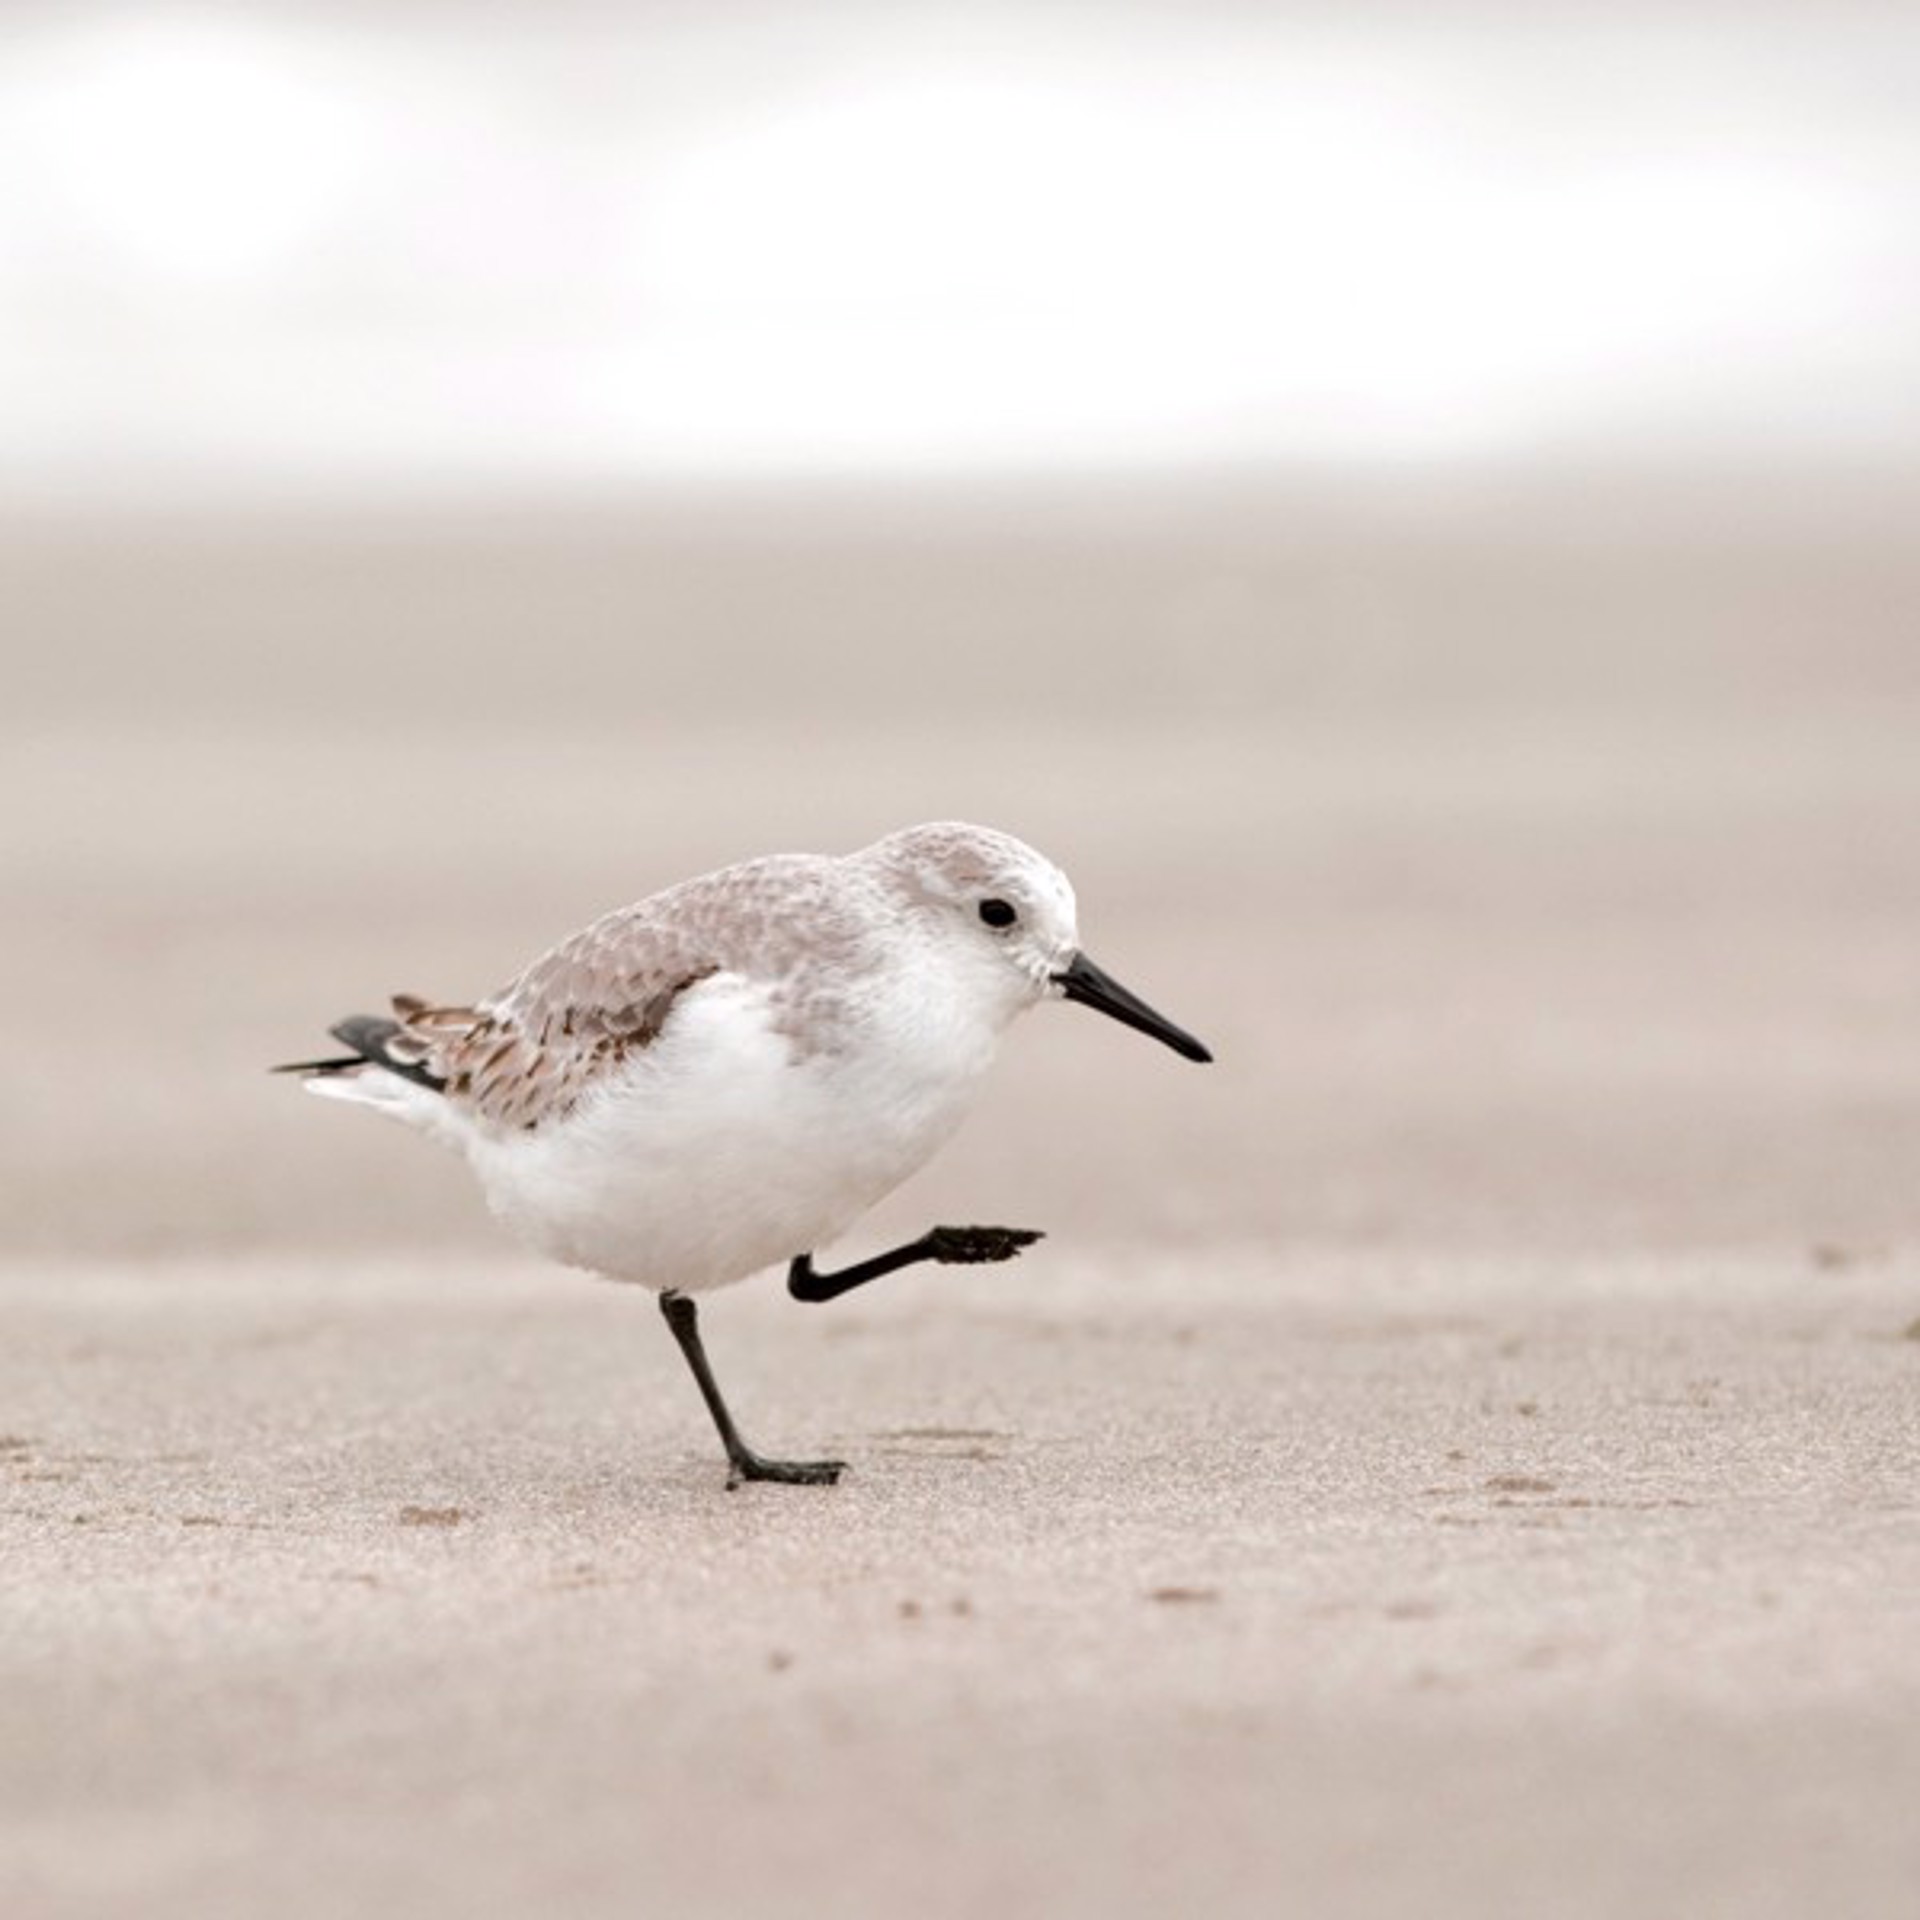 Sandpiper, III by Penny Hoey